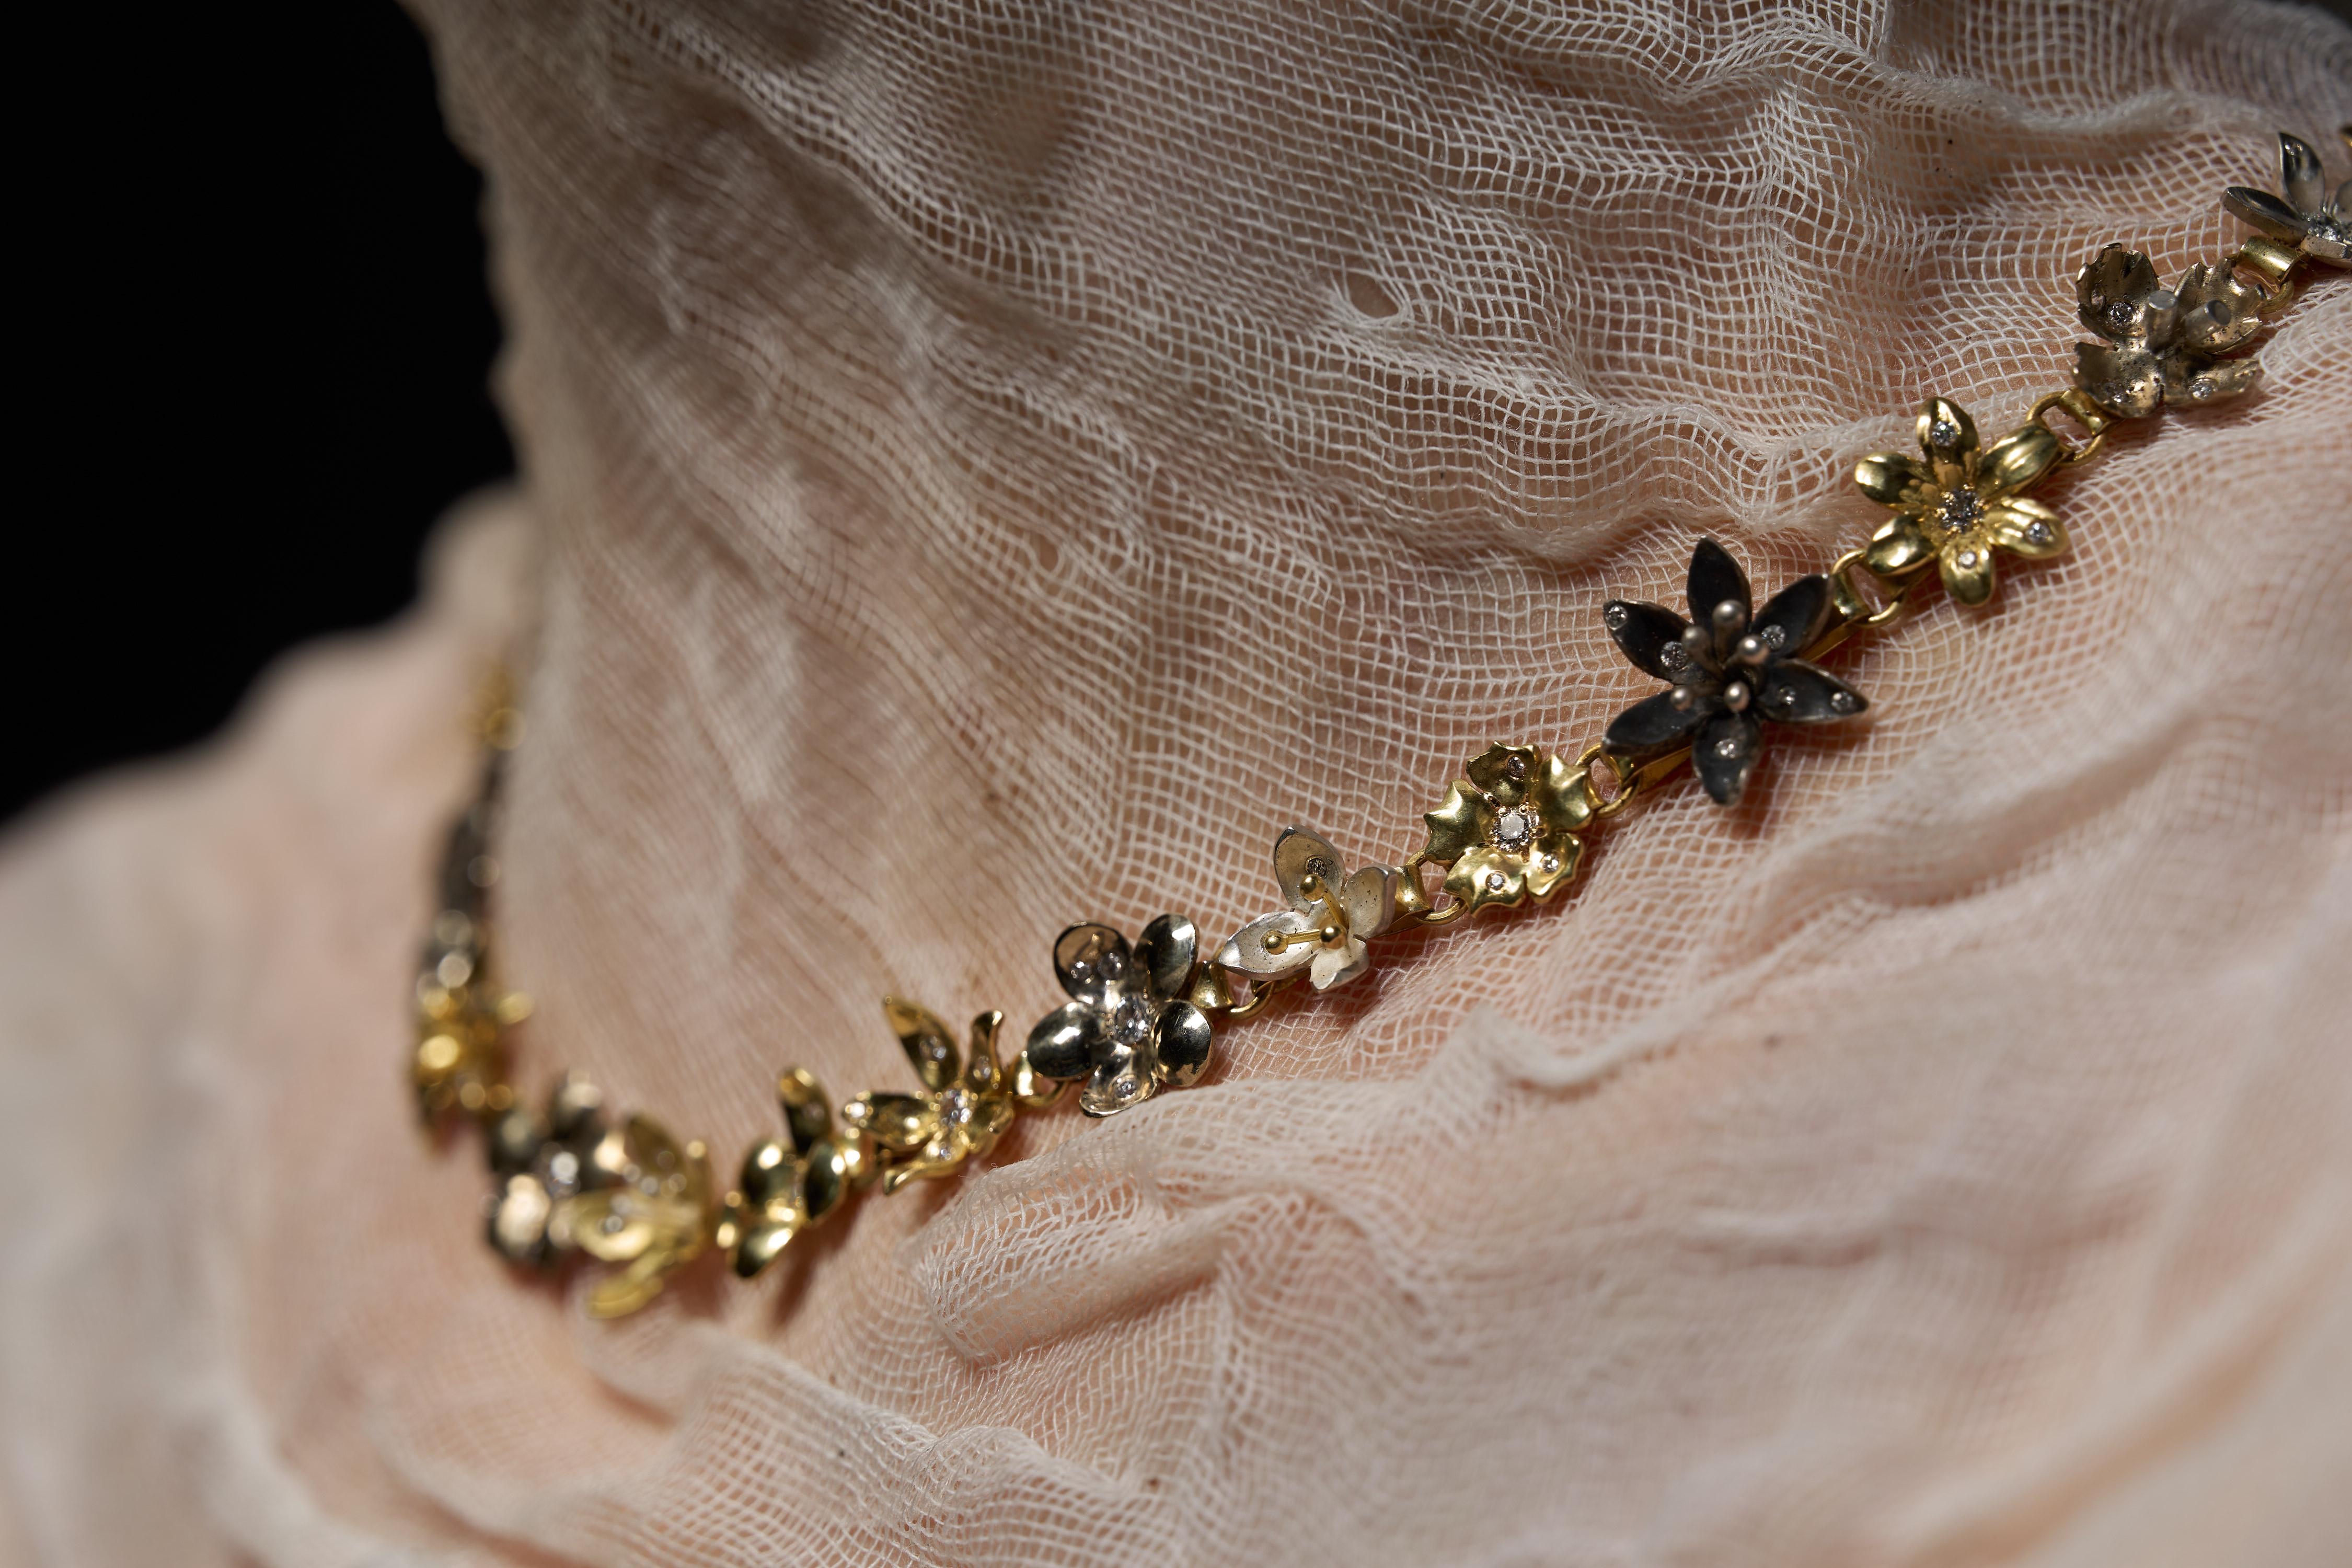 18K Fairmined Gold and Silver, Canadamark Diamonds, Handmade, Flower Necklace For Sale 4